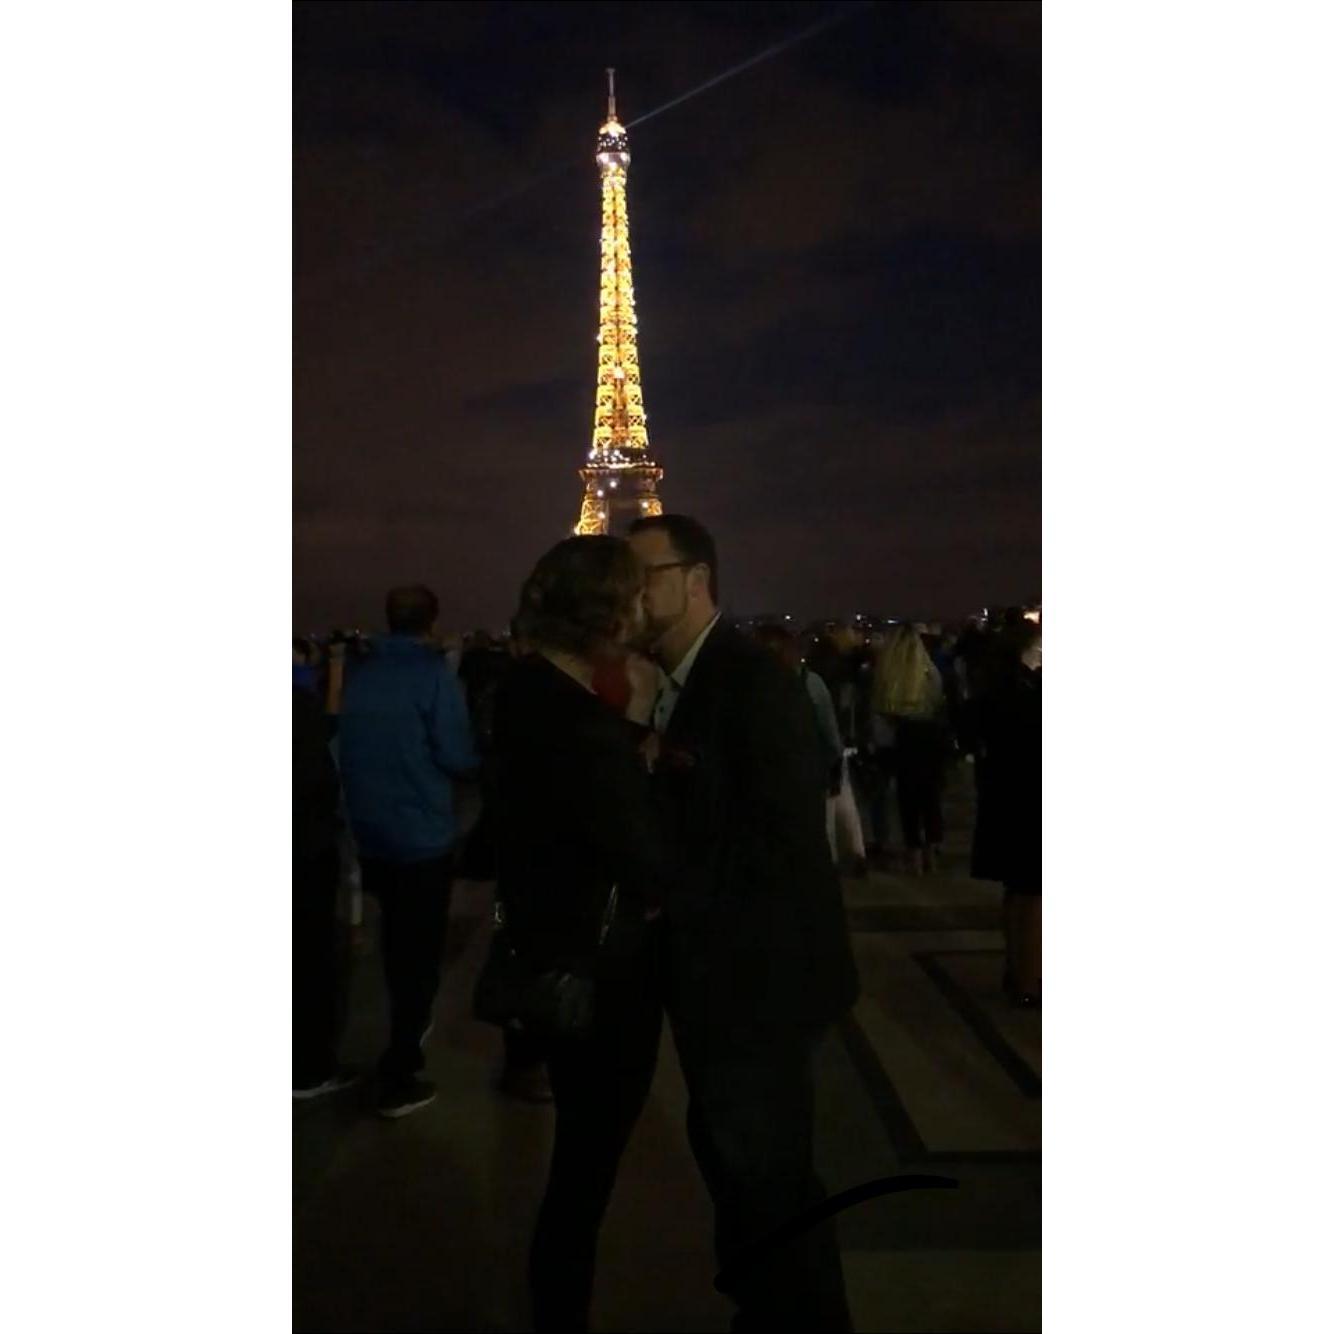 Odds of a yes after popping the question in front of the Eiffel Tower.. pretty high.